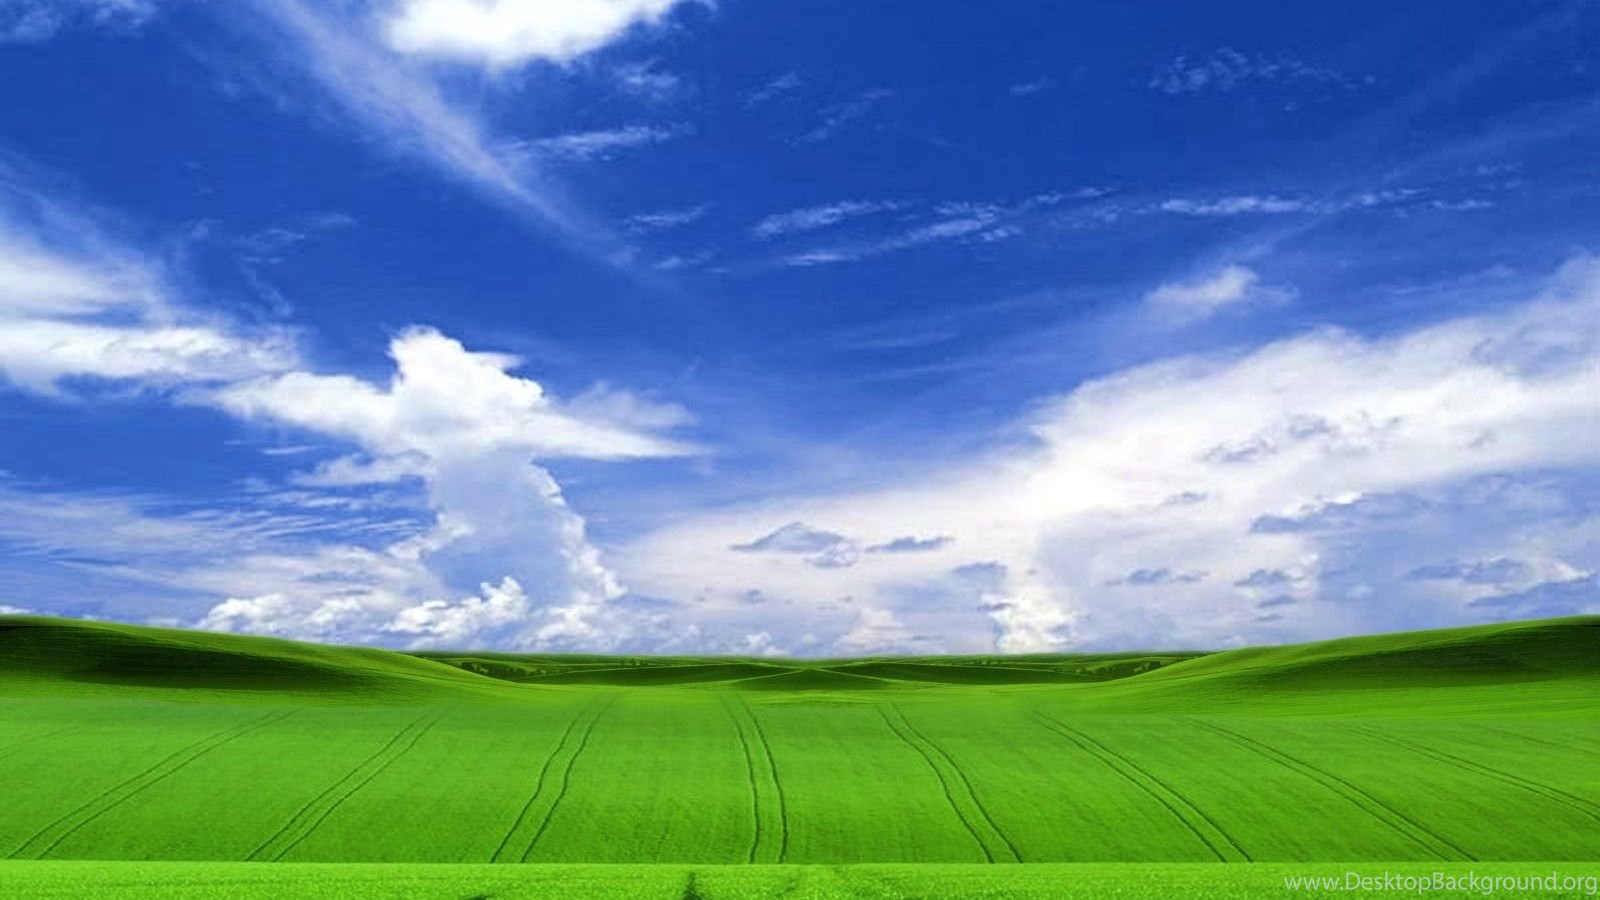 Background For Windows Xp